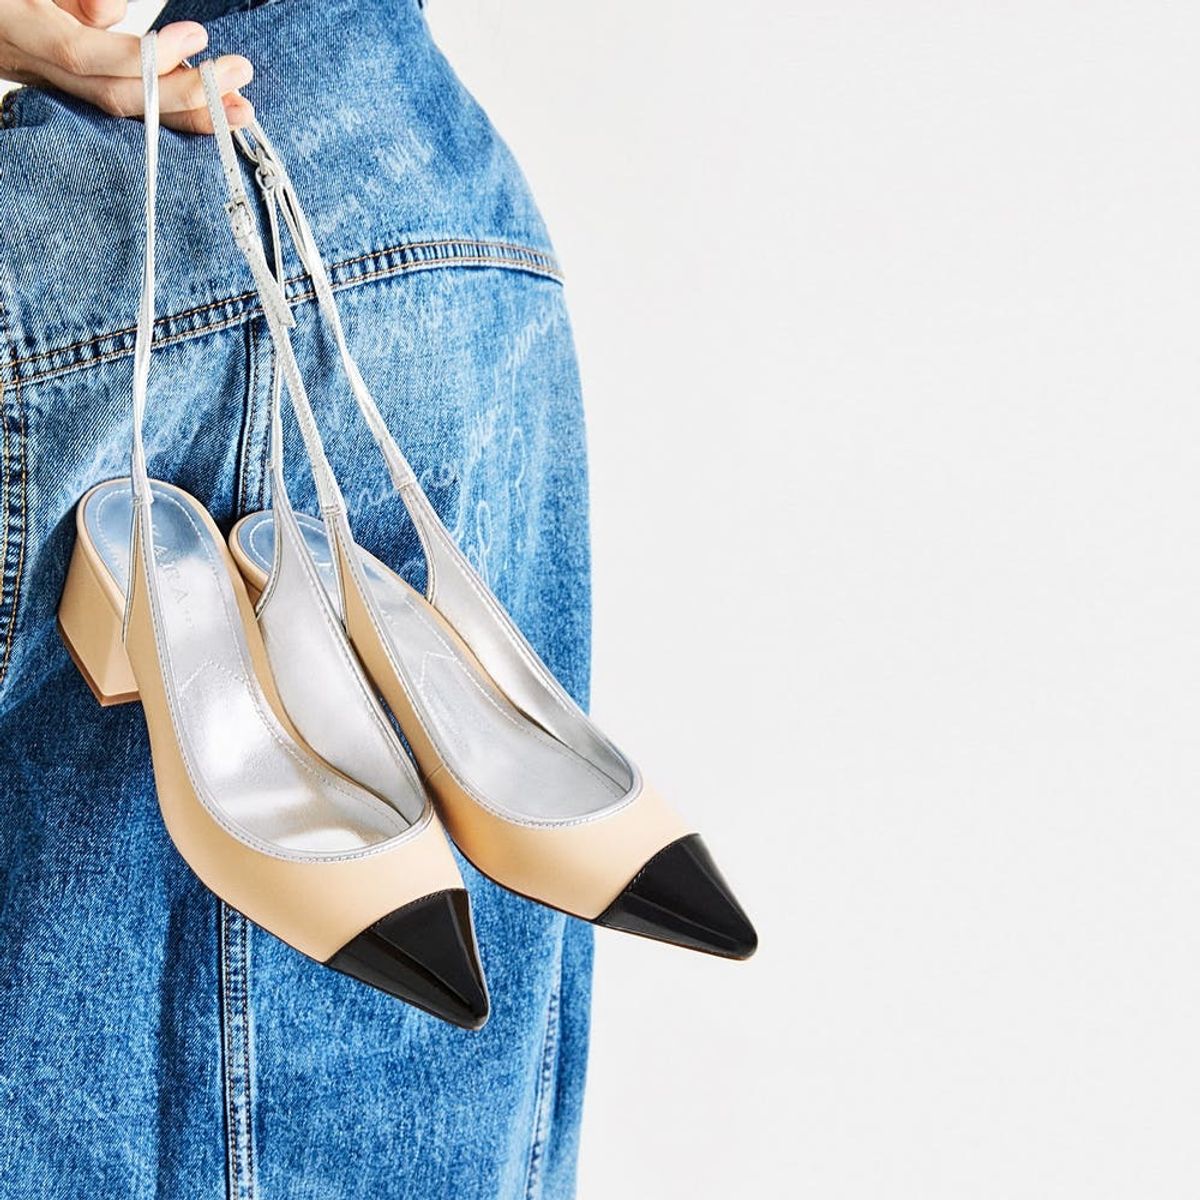 Style Strategy: 7 Fashion Buys That Totally Aren’t Worth It